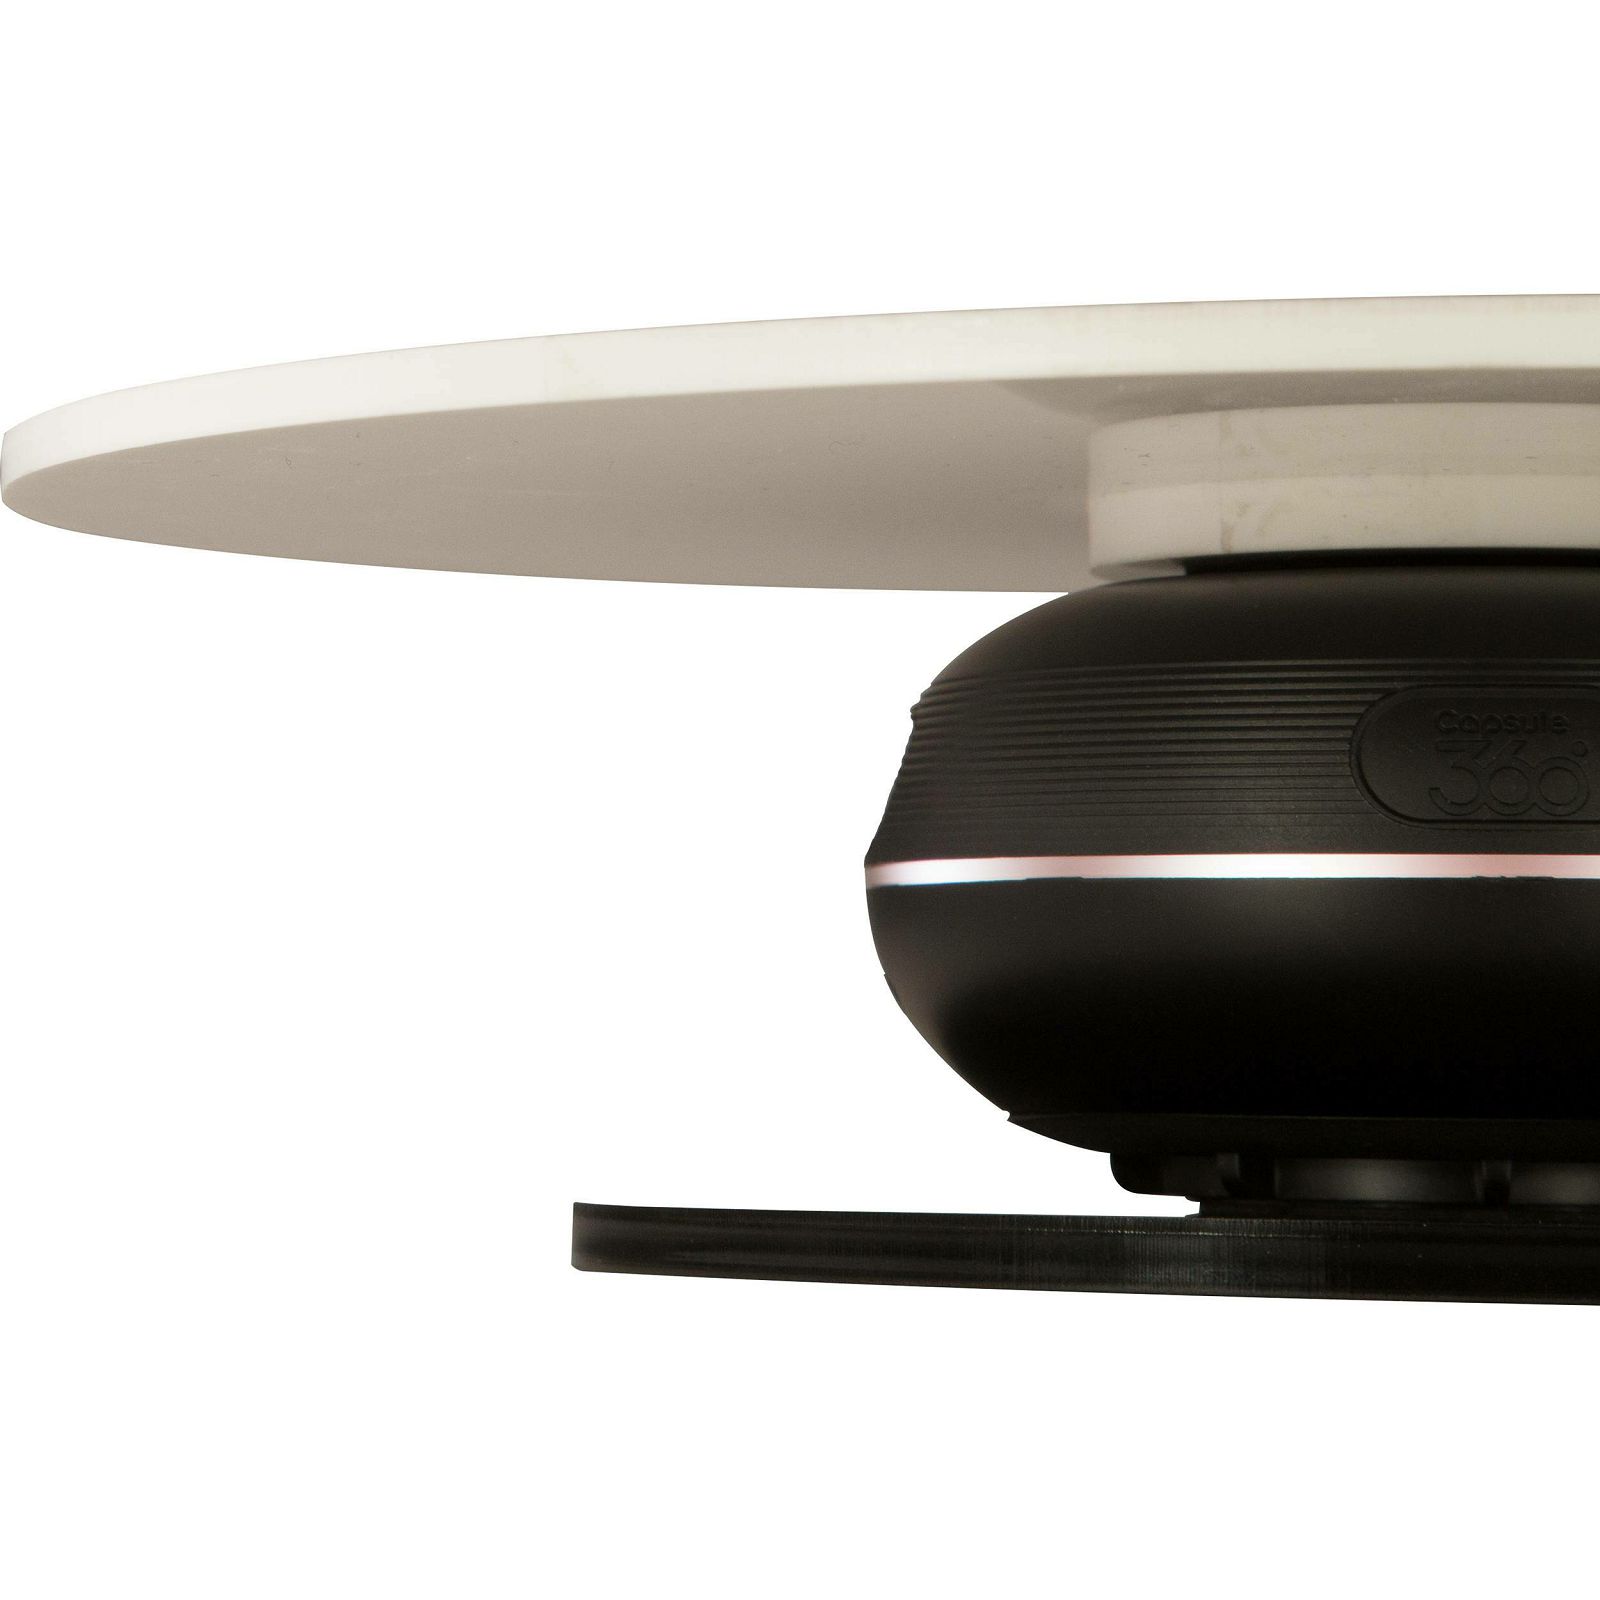 Miops Turntable for Capsule360